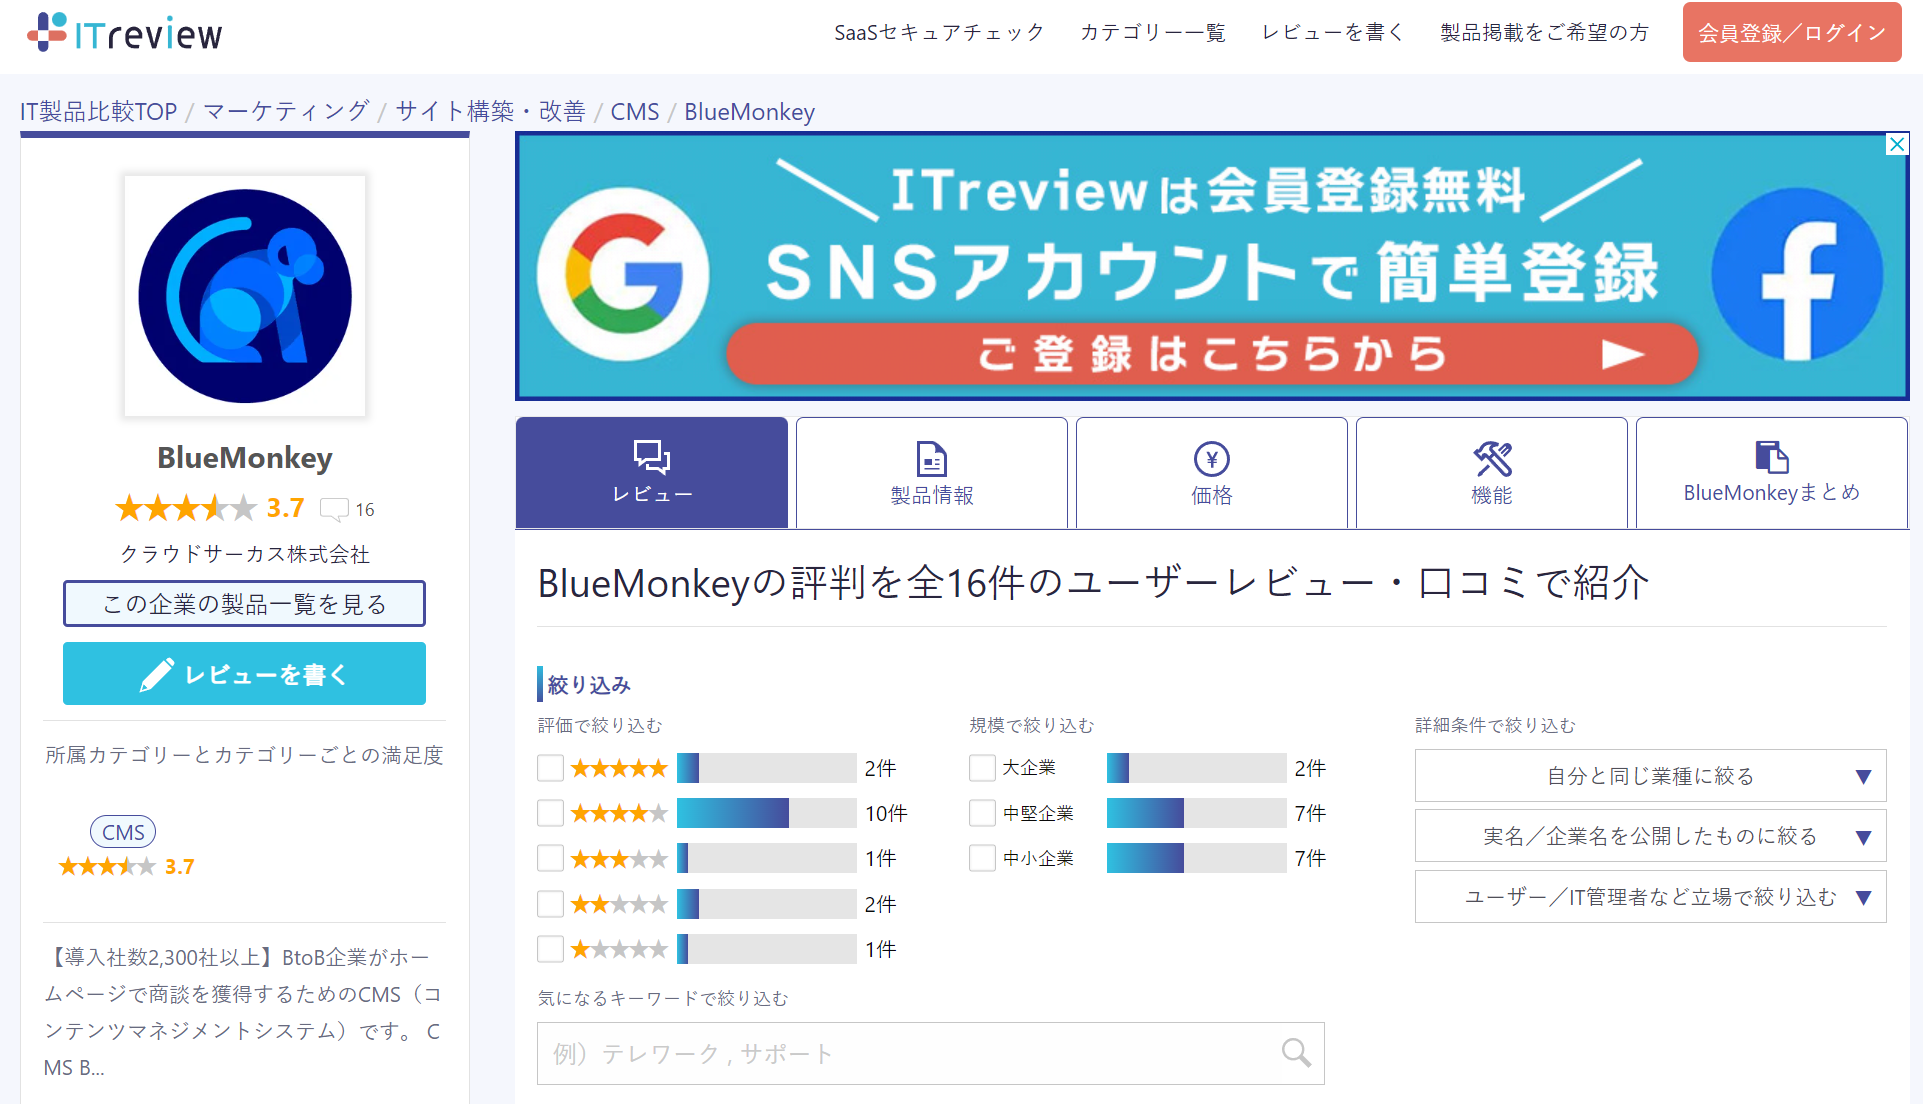 ITreviewの画面